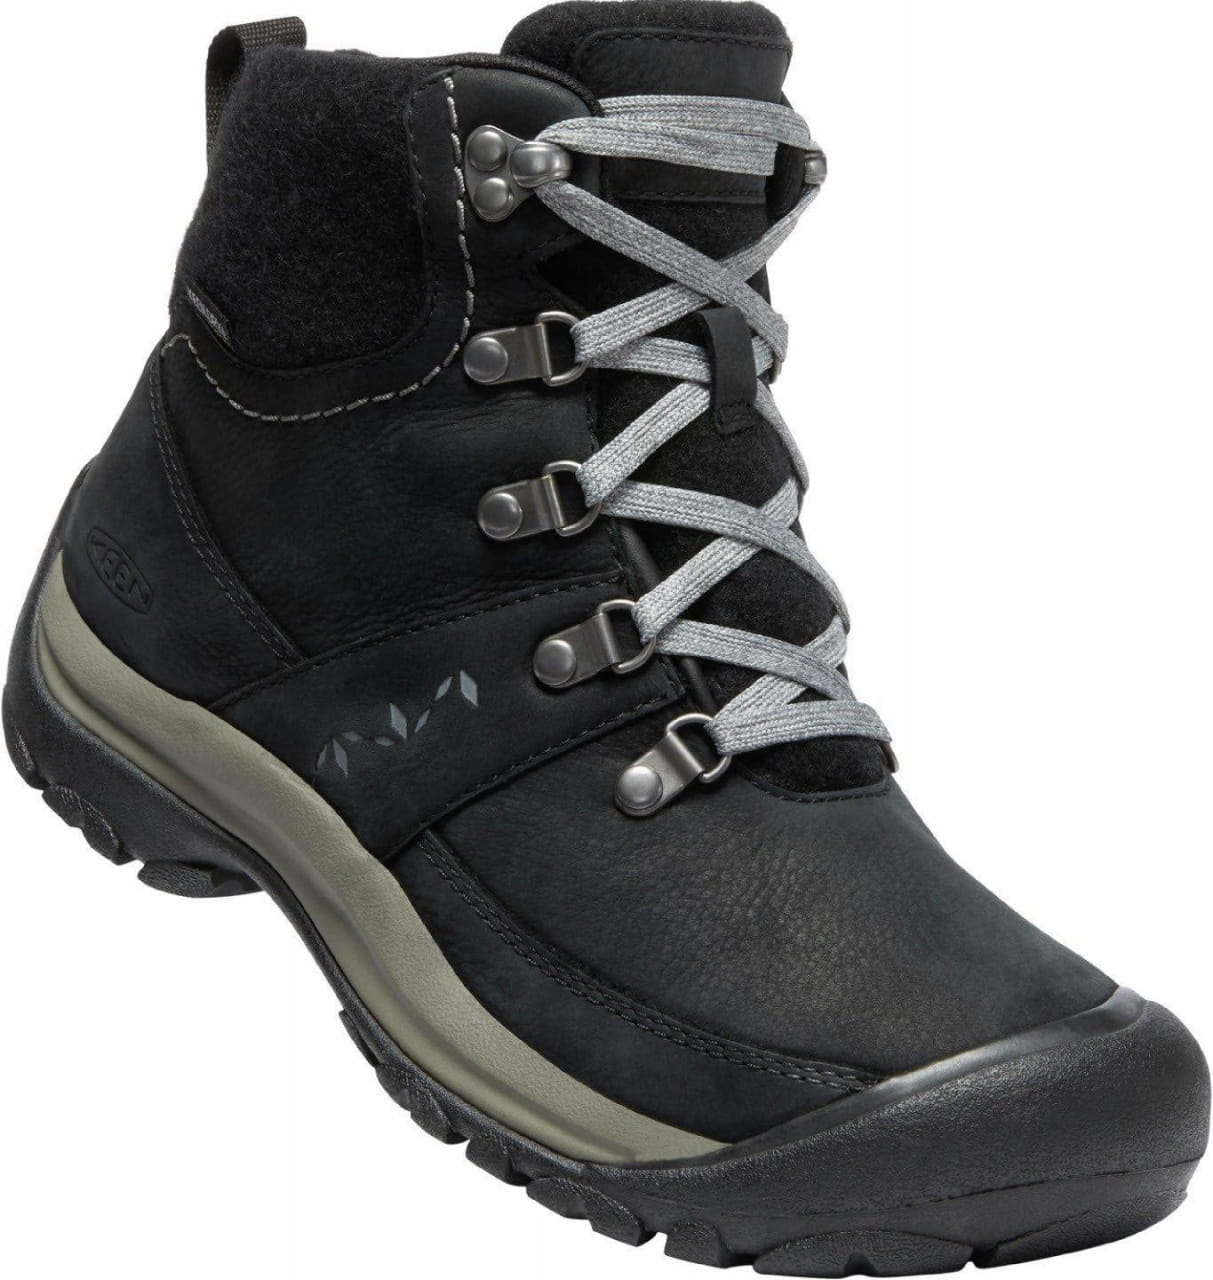 Chaussures d'hiver pour femmes Keen Kaci III Winter Mid Wp W